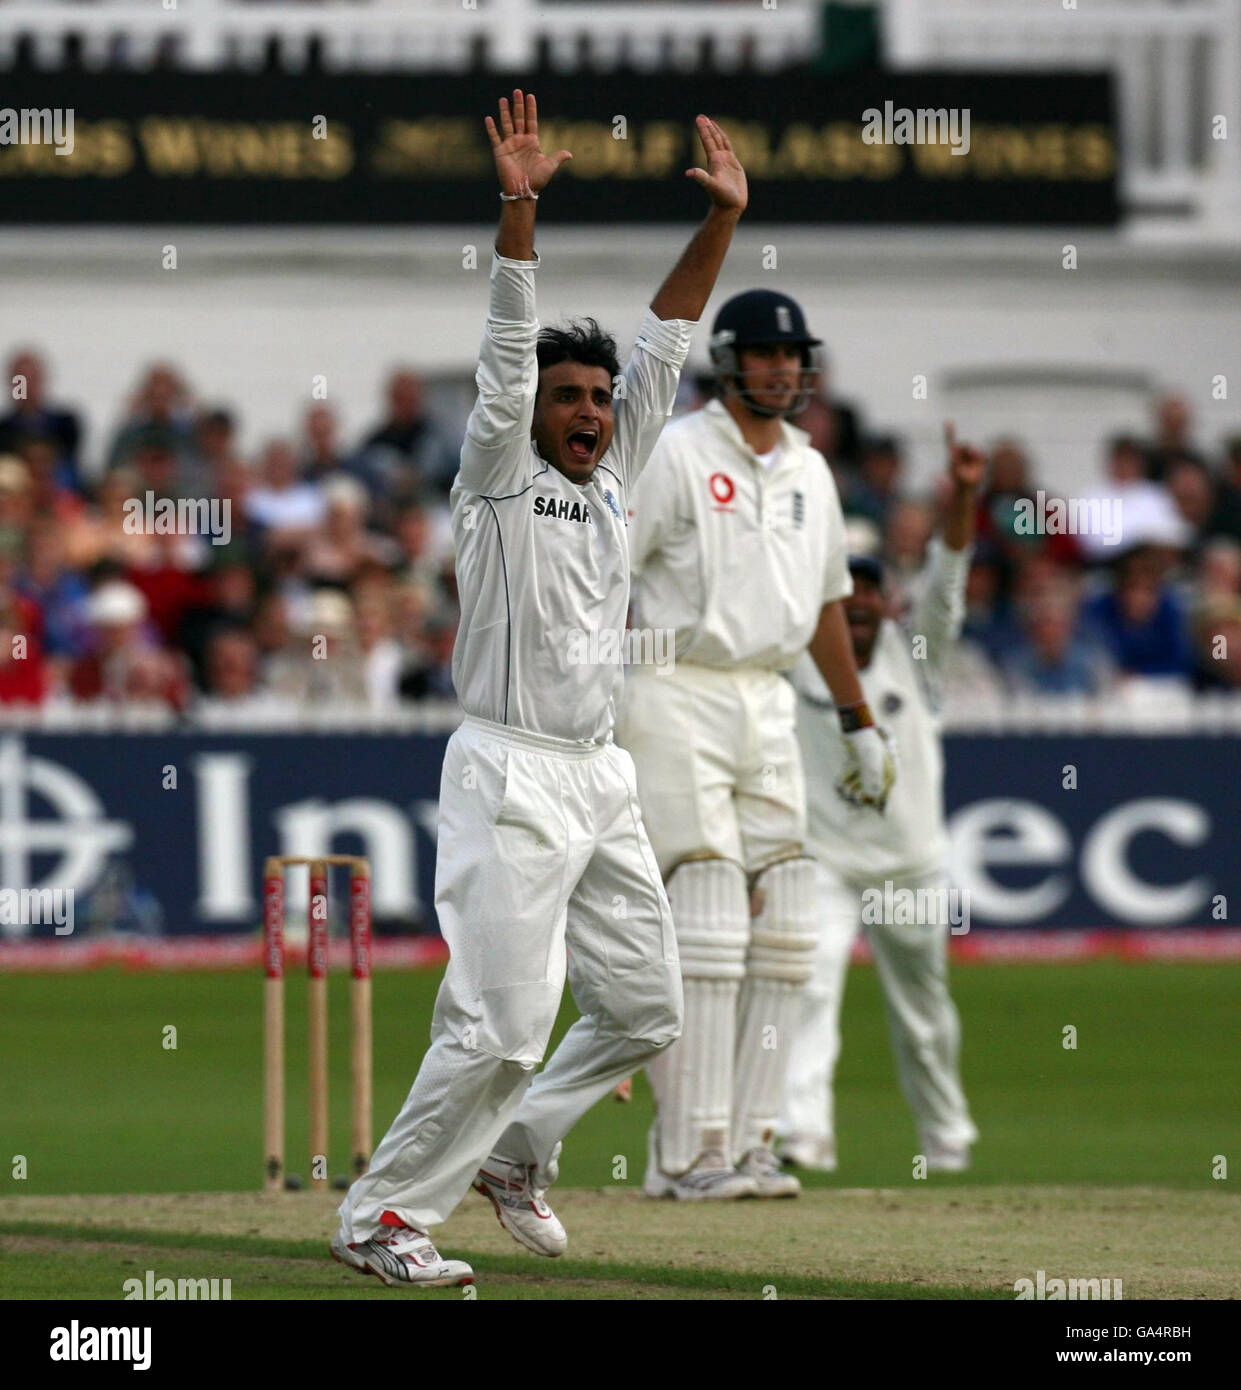 India's Sourav Ganguly celebrates after trapping England's Alastair Cook LBW during the Second npower Test match at Trent Bridge, Nottingham. Stock Photo